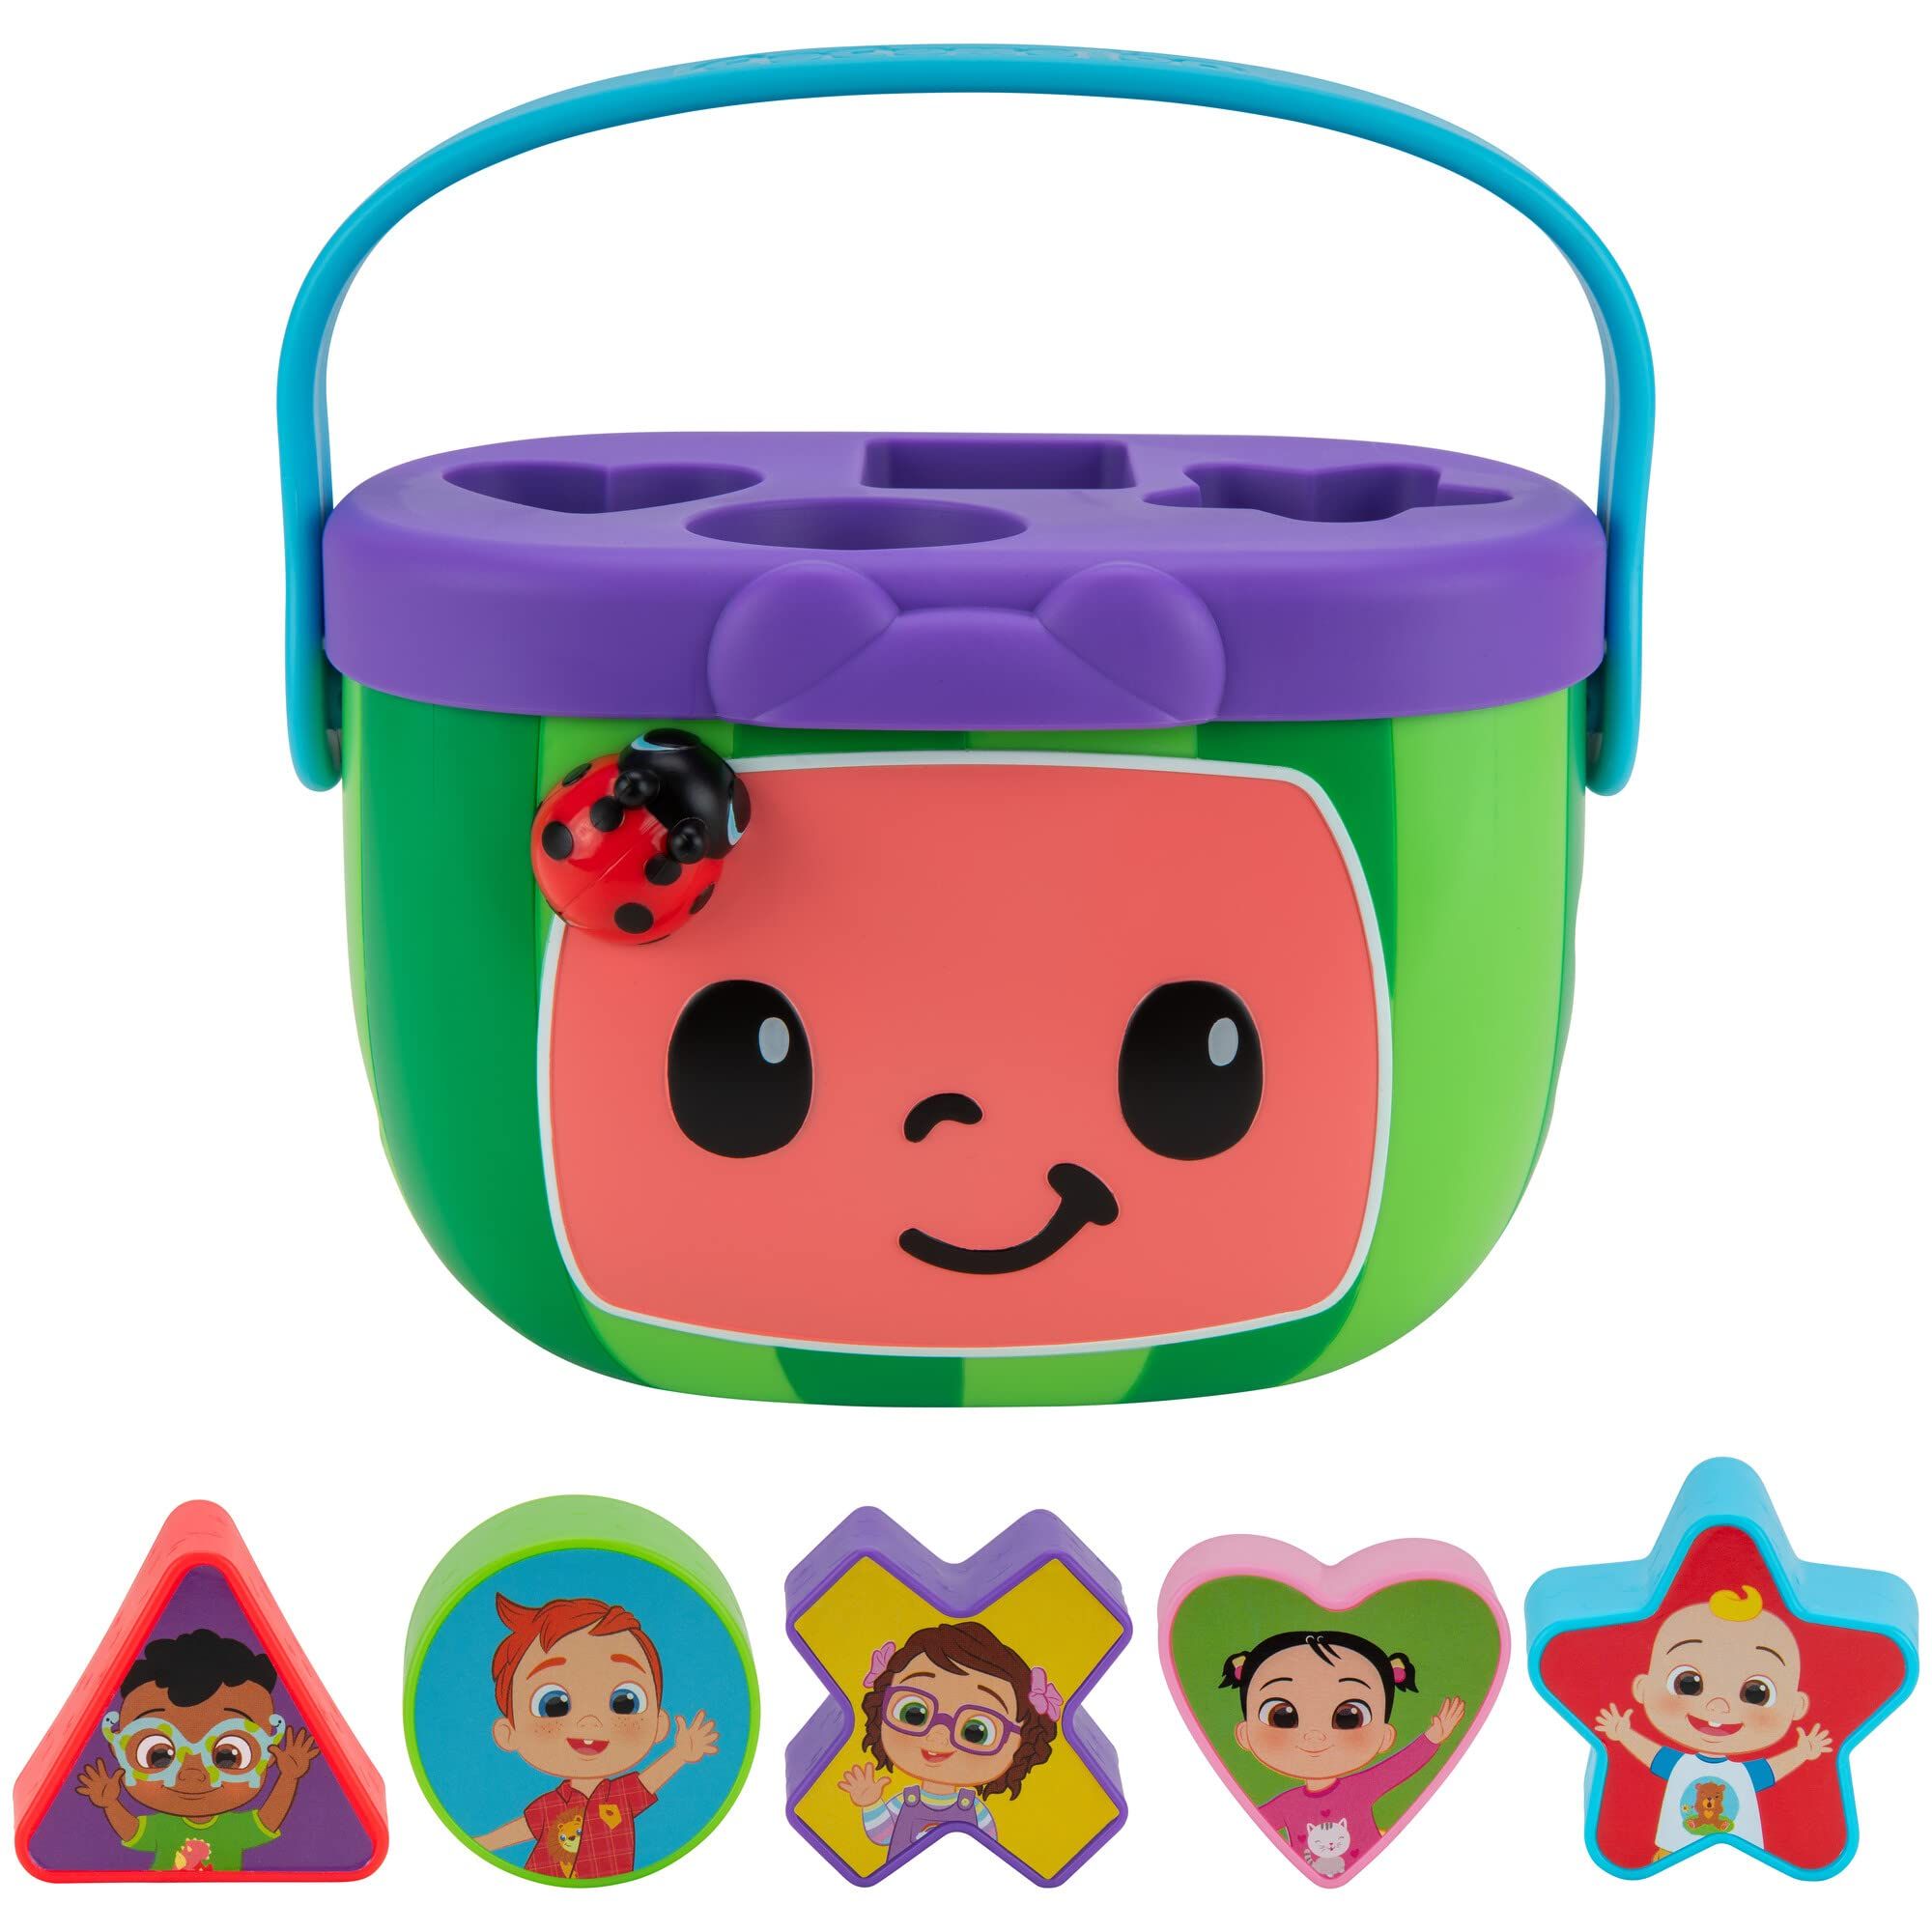 CoComelon Shape Sorter - Identify Shapes - Favorite Characters - Toys for Kids, 